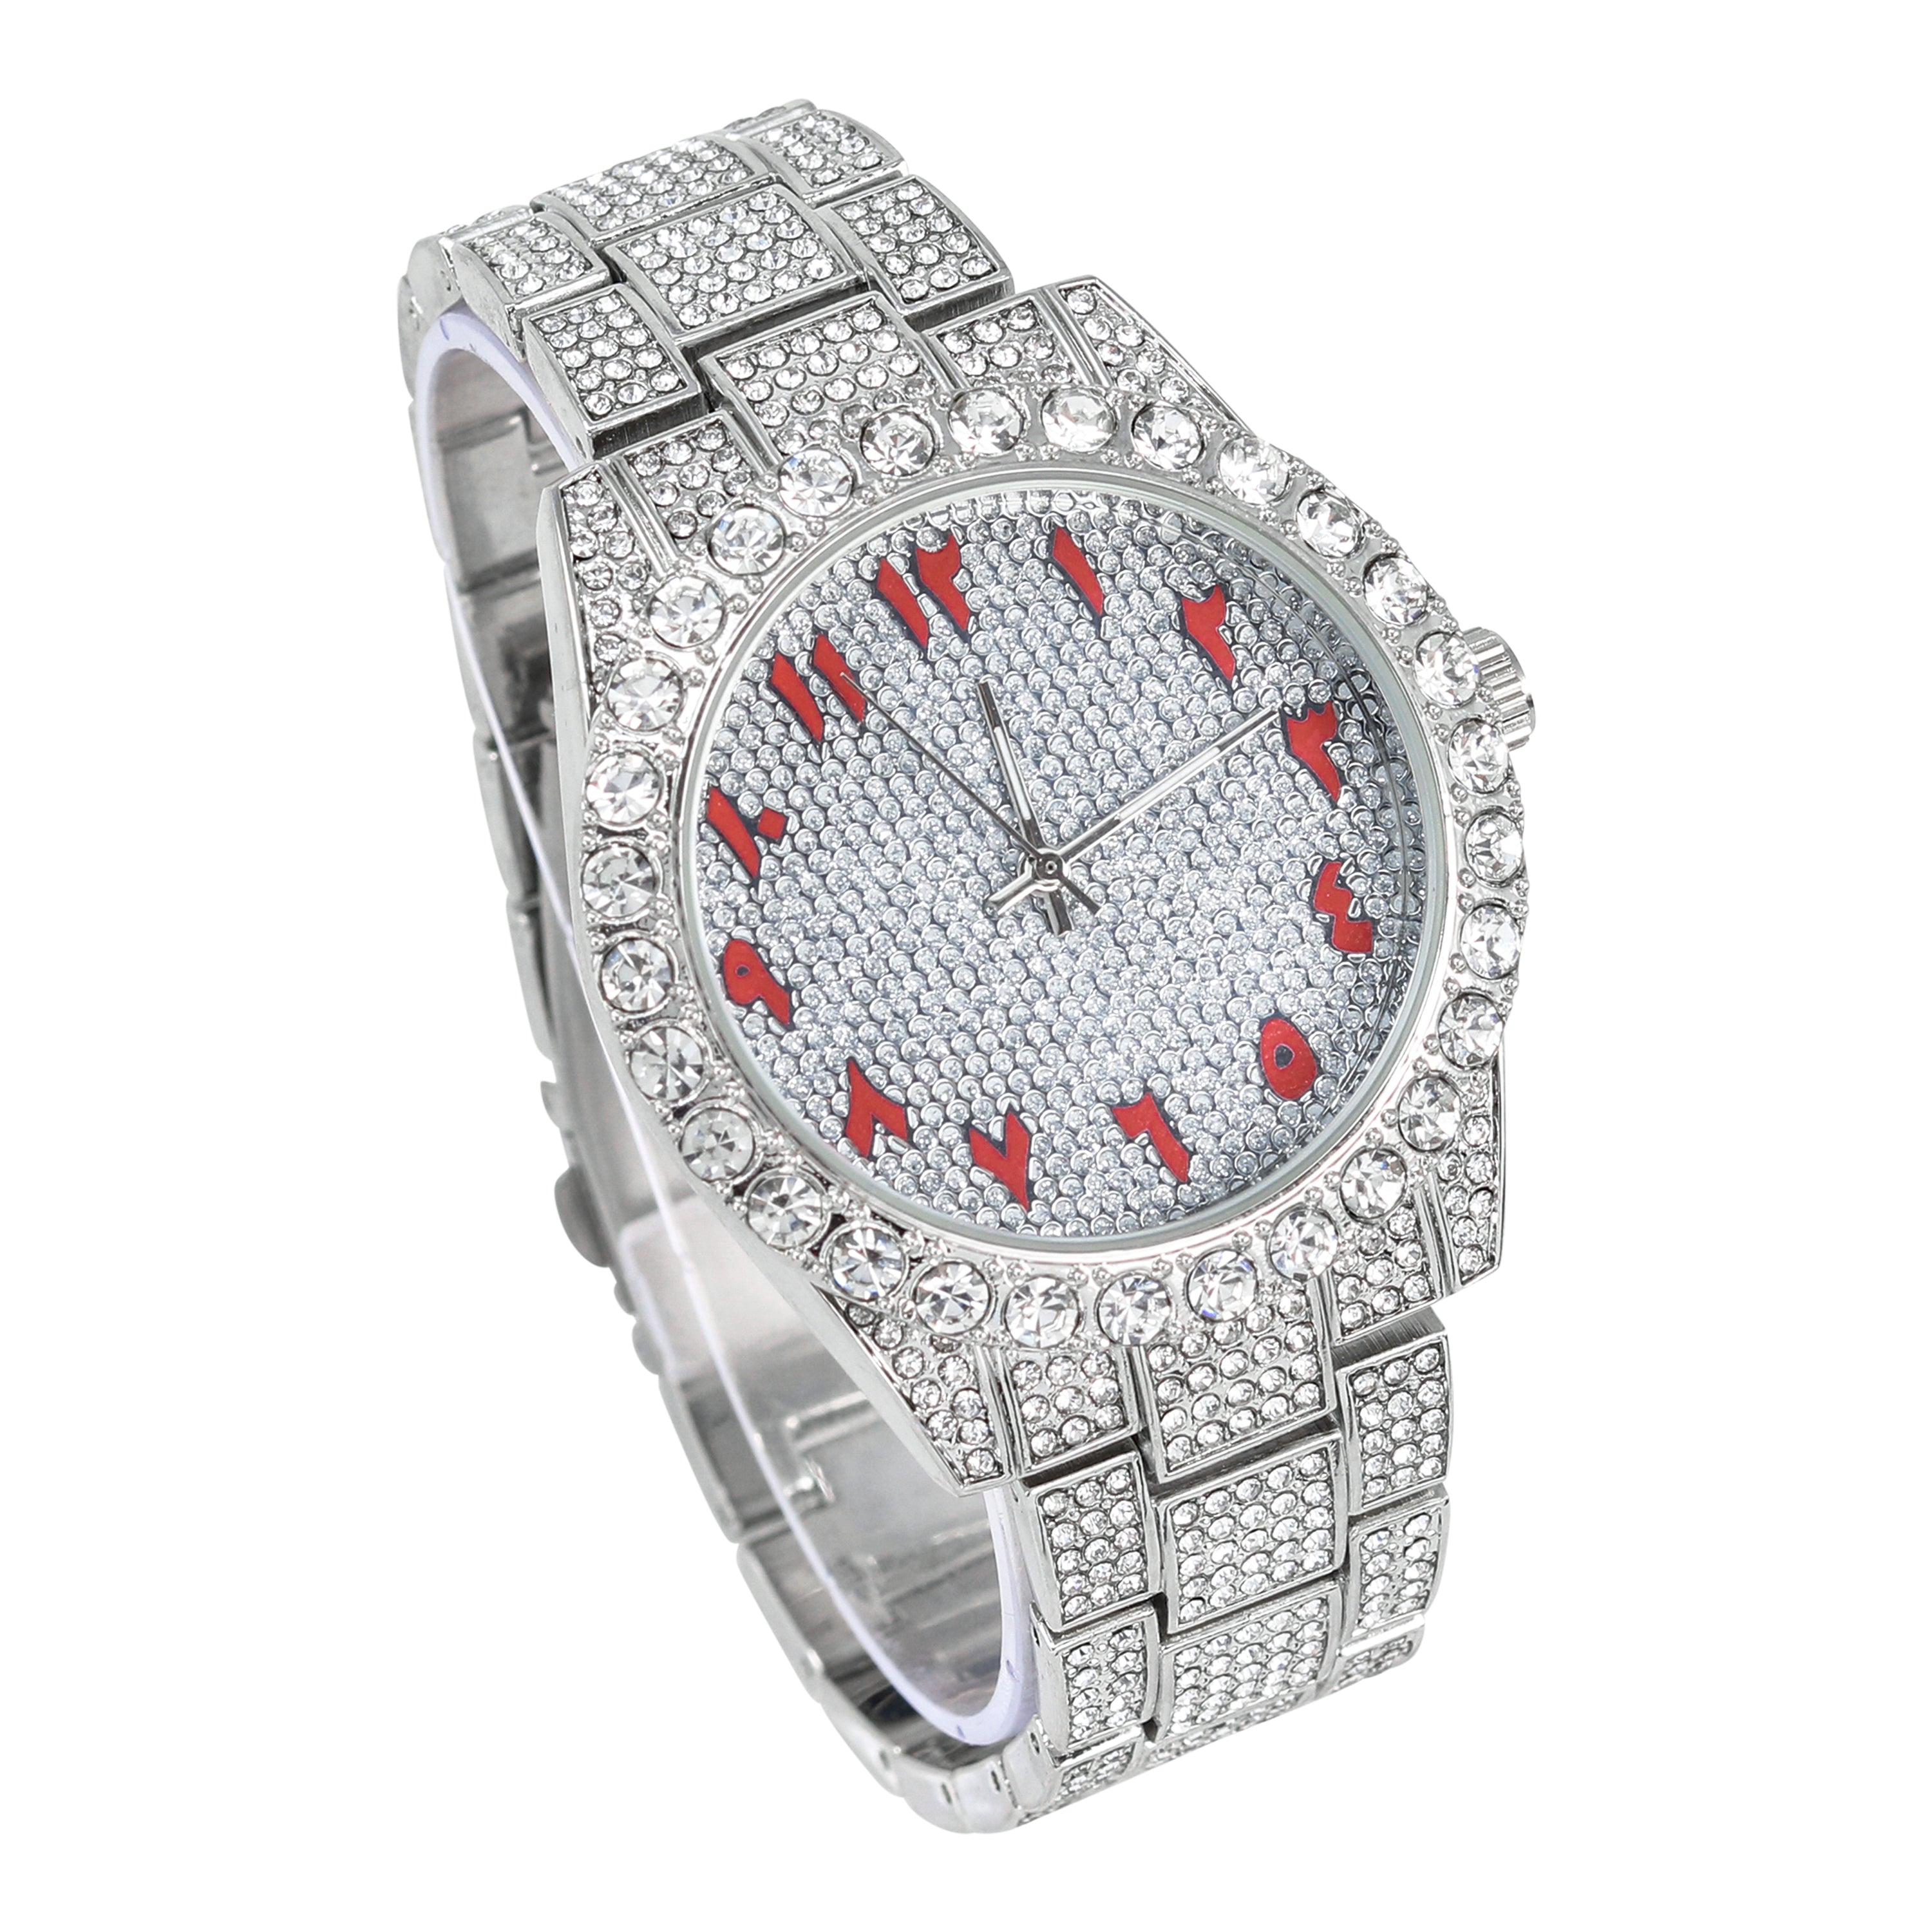 Men's Round Iced Out Watch 45mm Silver - Arab Dial